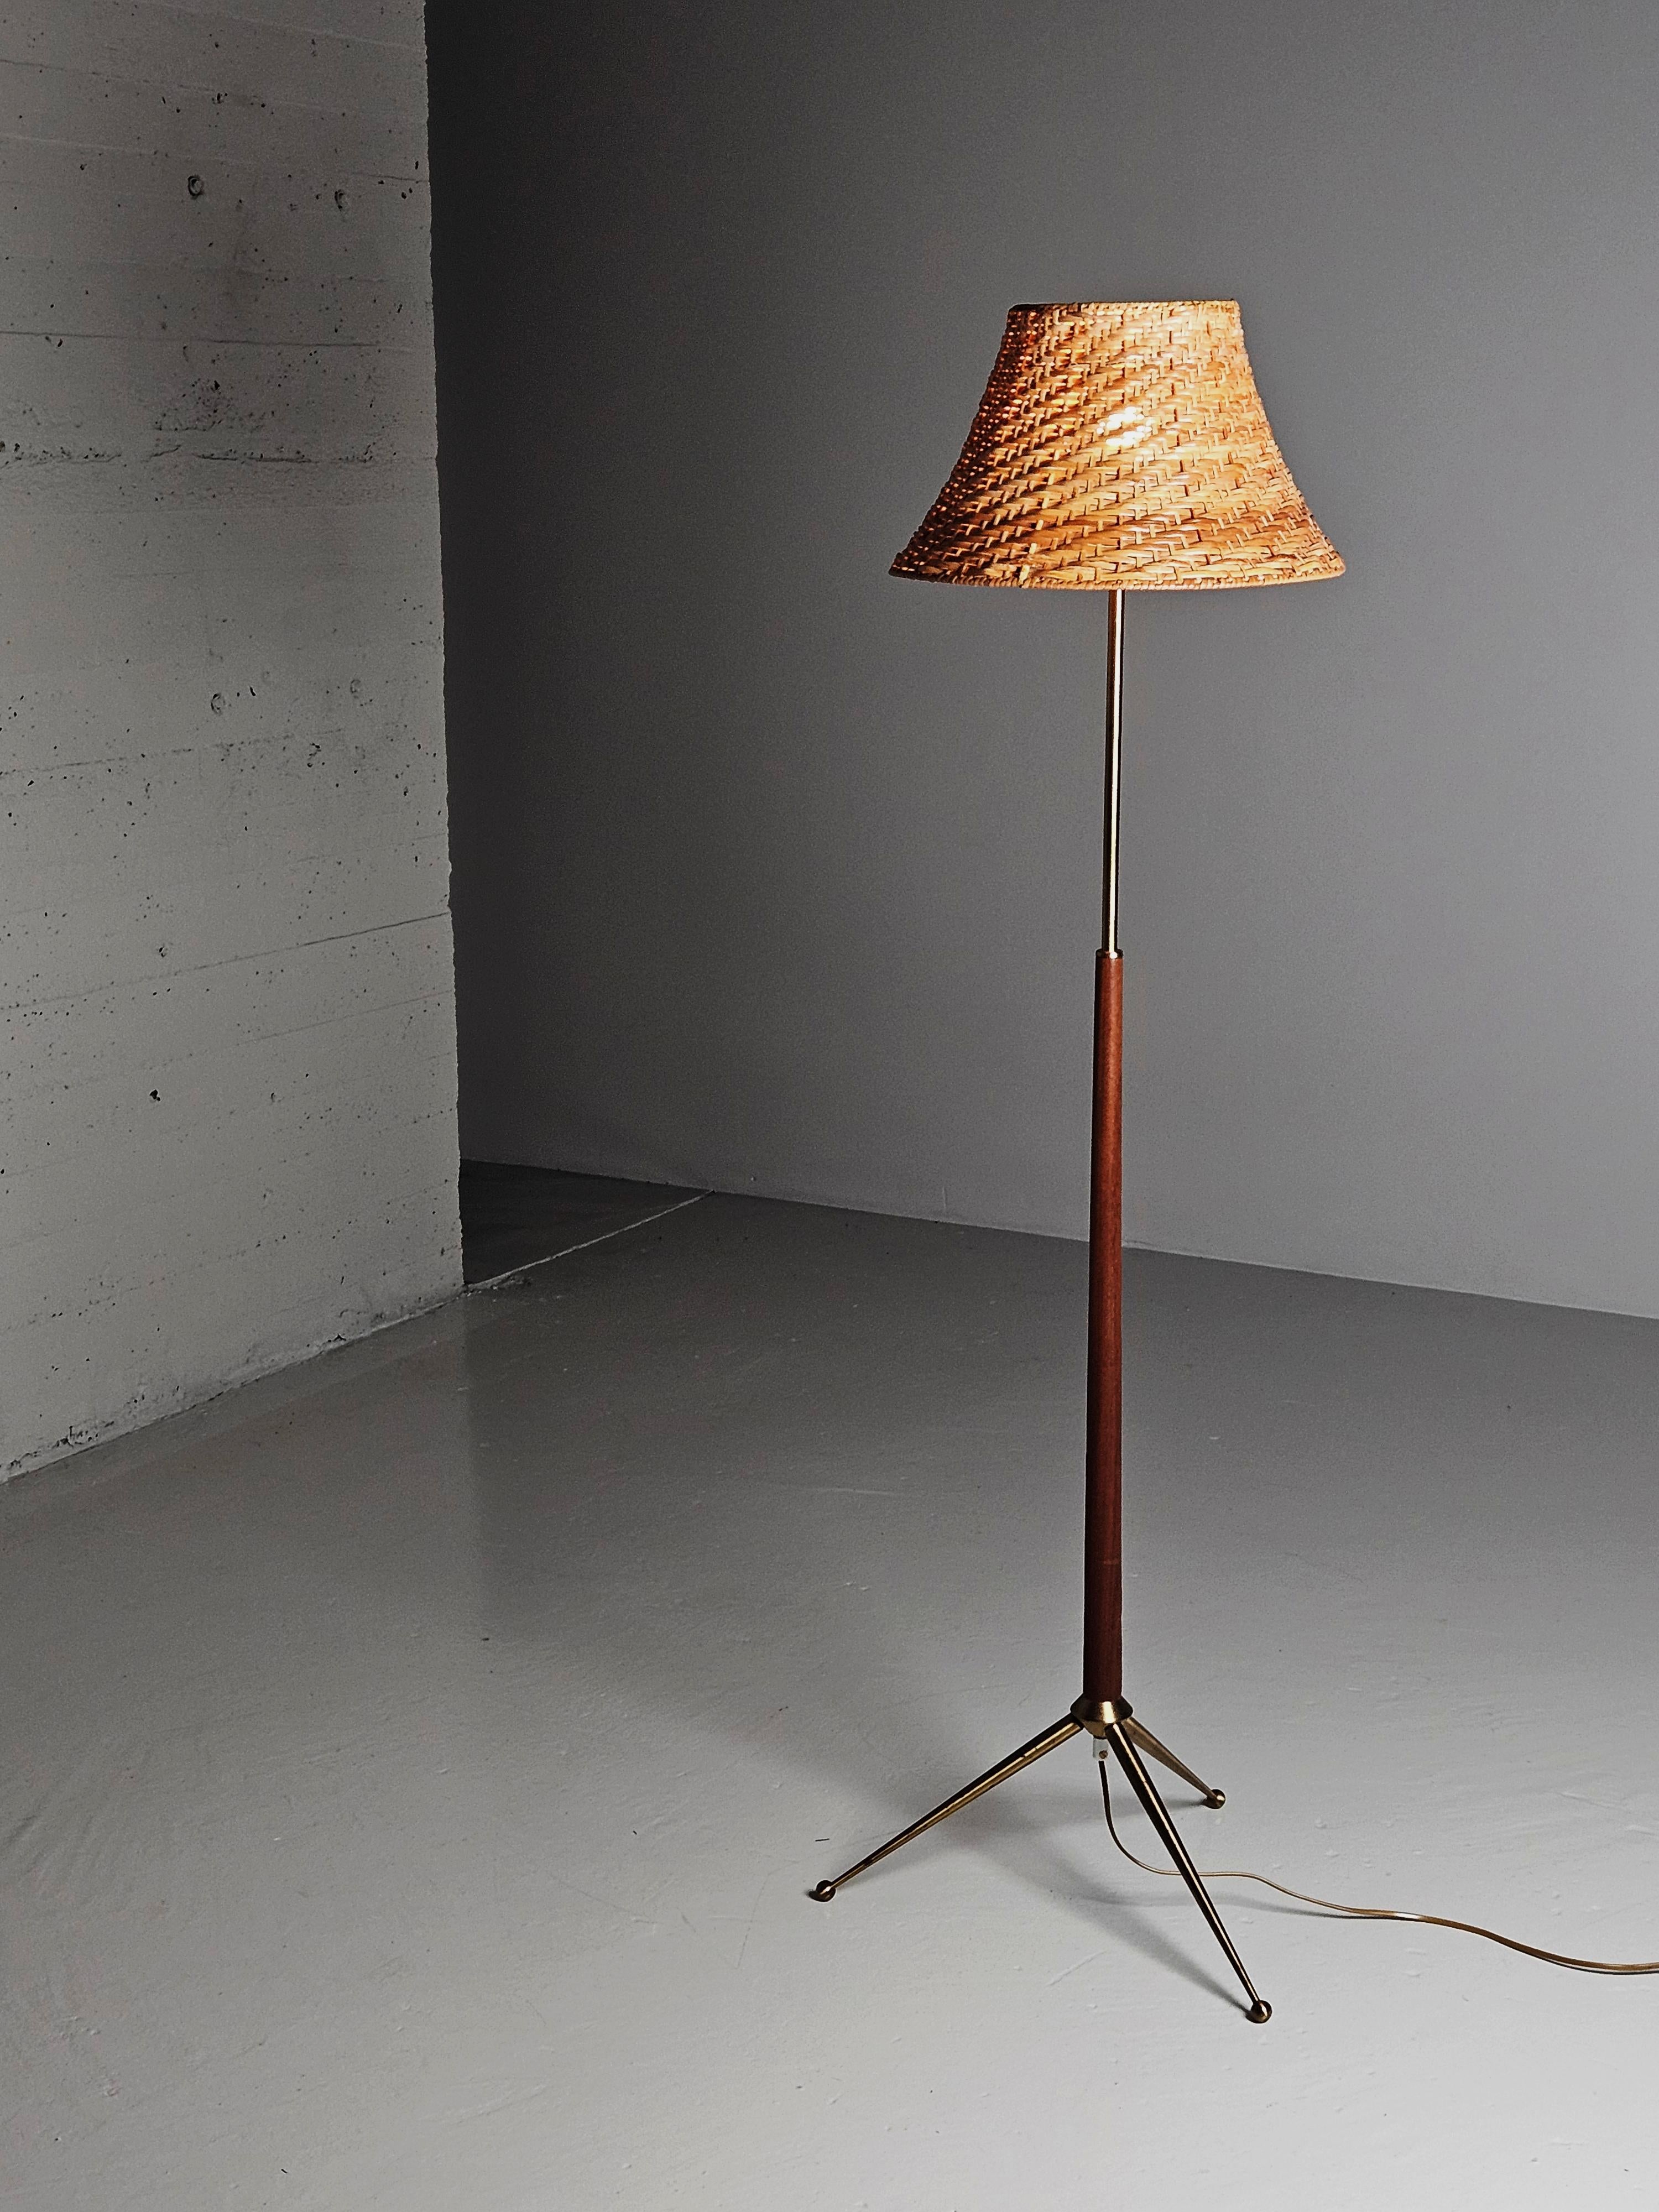 Floor lamp by unknown designer in Sweden during the 1960s. 

Modernistic design with a brass tripod foot. Comes with a beautiful rattan shade. 